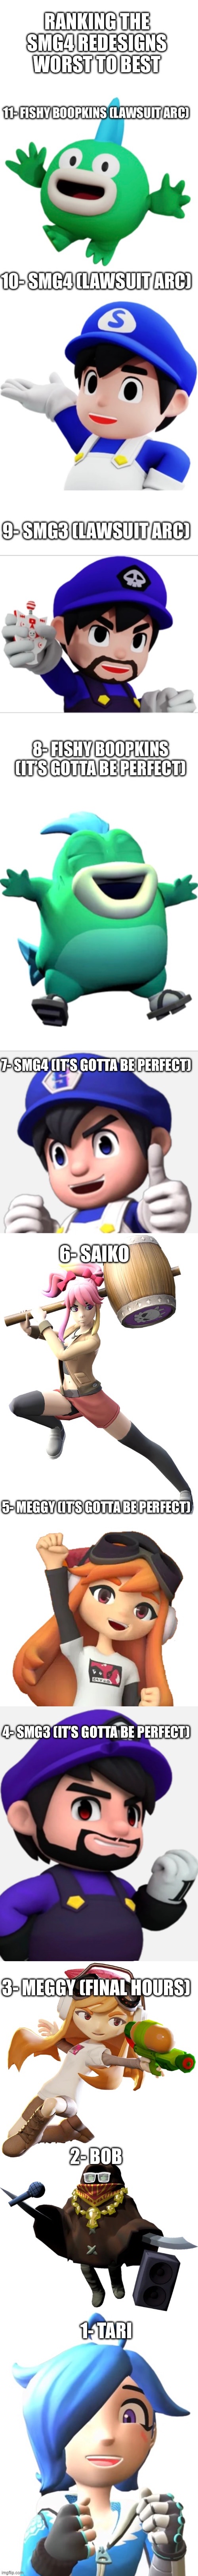 RANKING THE SMG4 REDESIGNS WORST TO BEST; 4- SMG3 (IT’S GOTTA BE PERFECT); 1- TARI | made w/ Imgflip meme maker